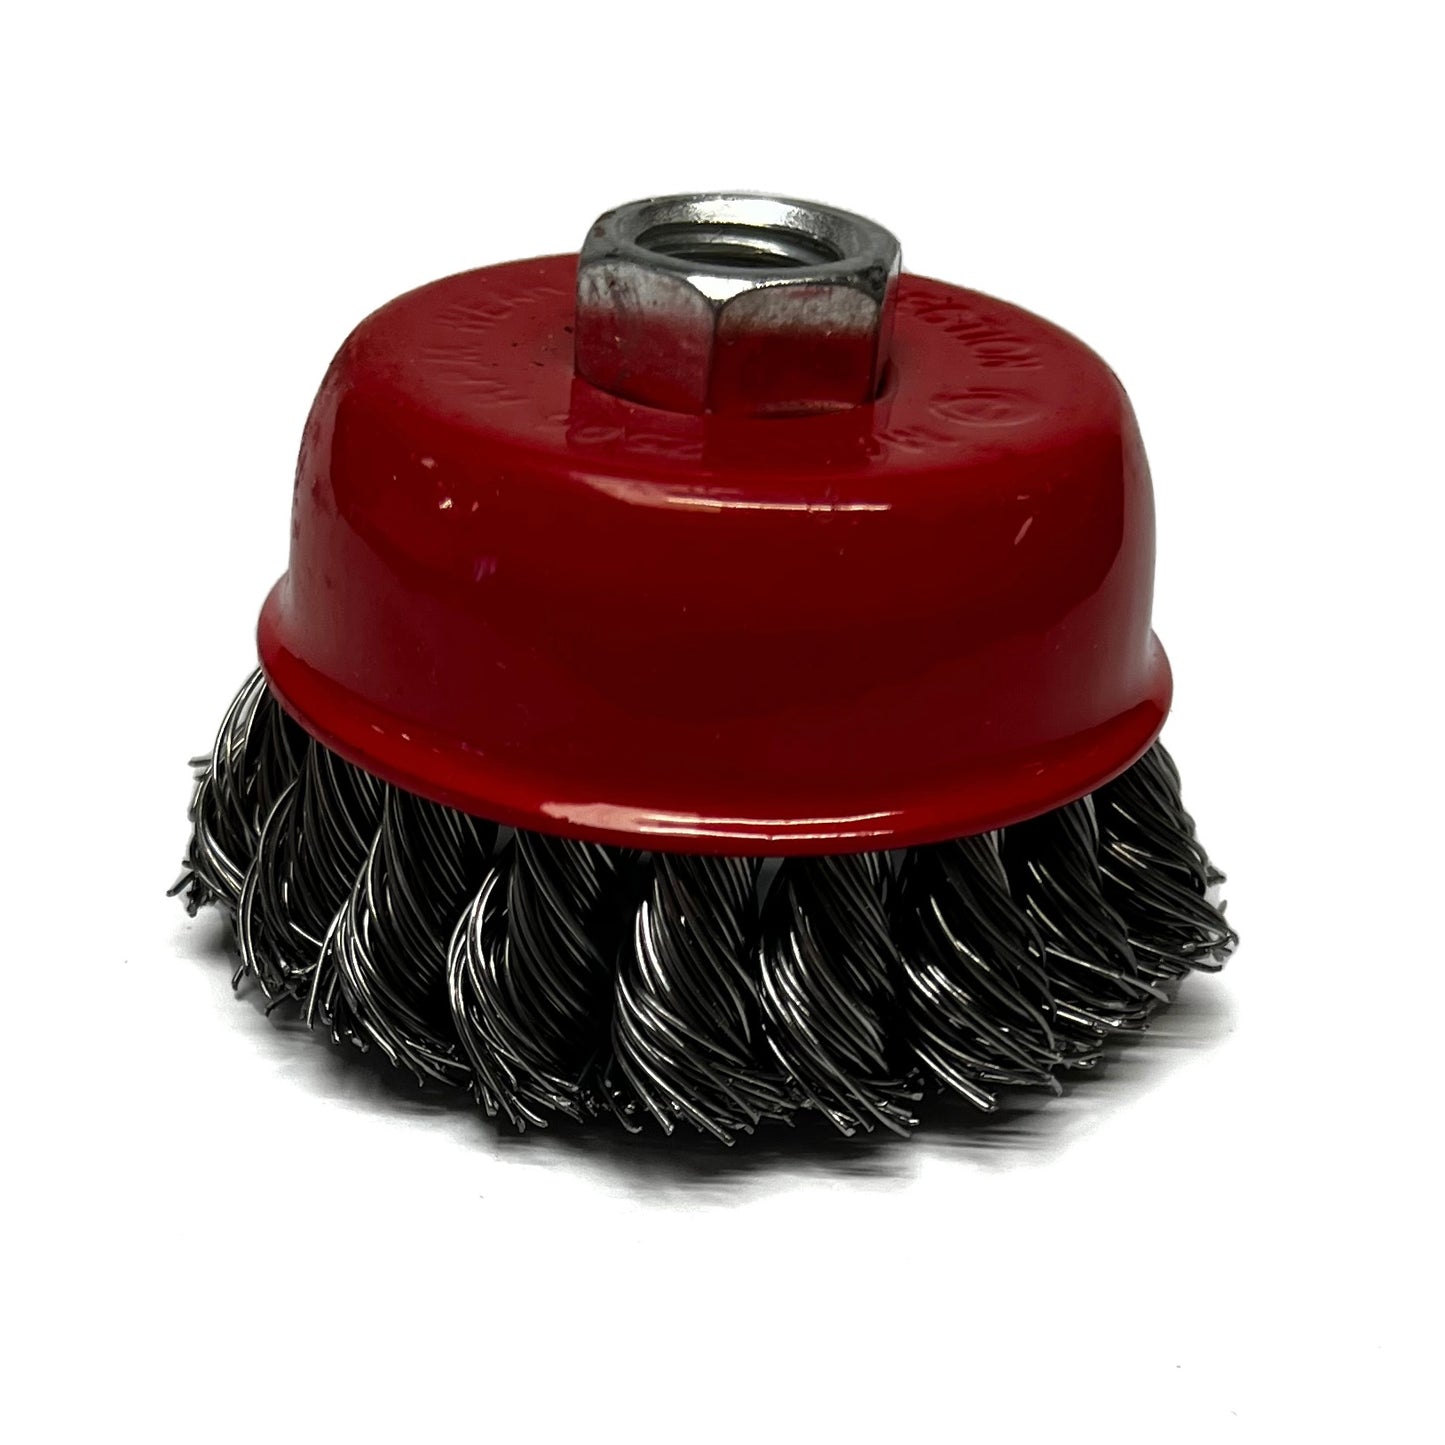 WILCO TWIST KNOT CUP BRUSH